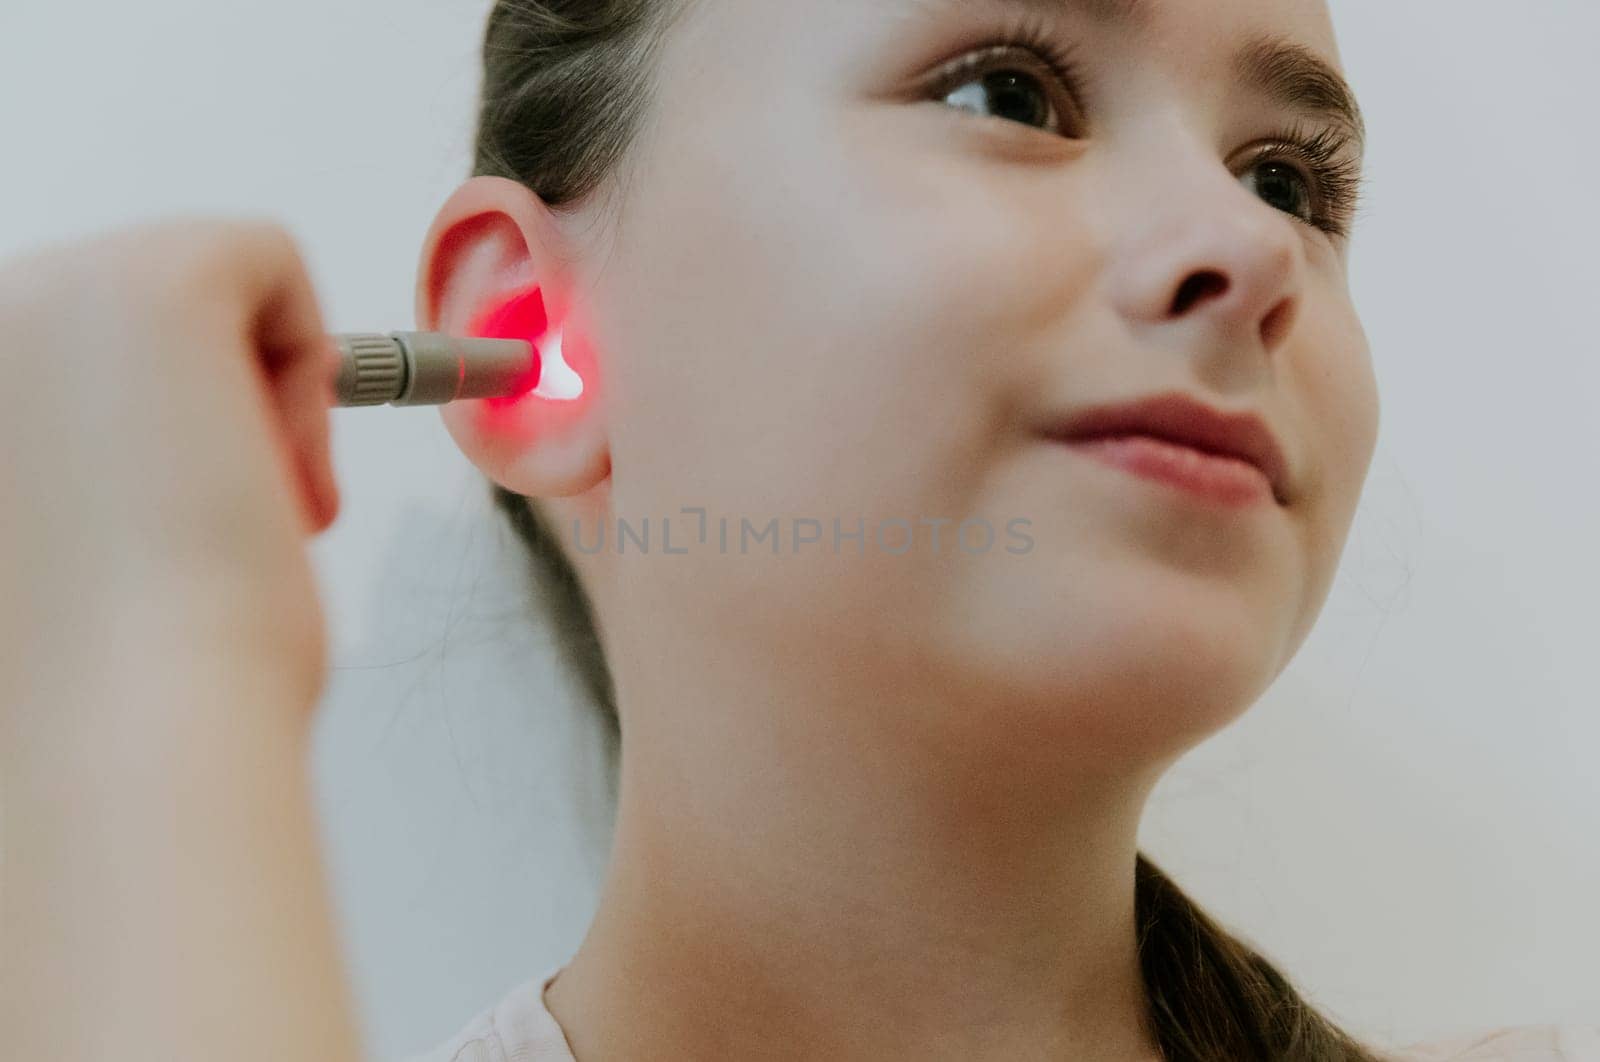 One beautiful Caucasian brunette girl with a happy smile, collected hair and in a pink T-shirt treats her right ear with an infrared light device, sitting on a bed at home near a white wall, a very close-up view from below.